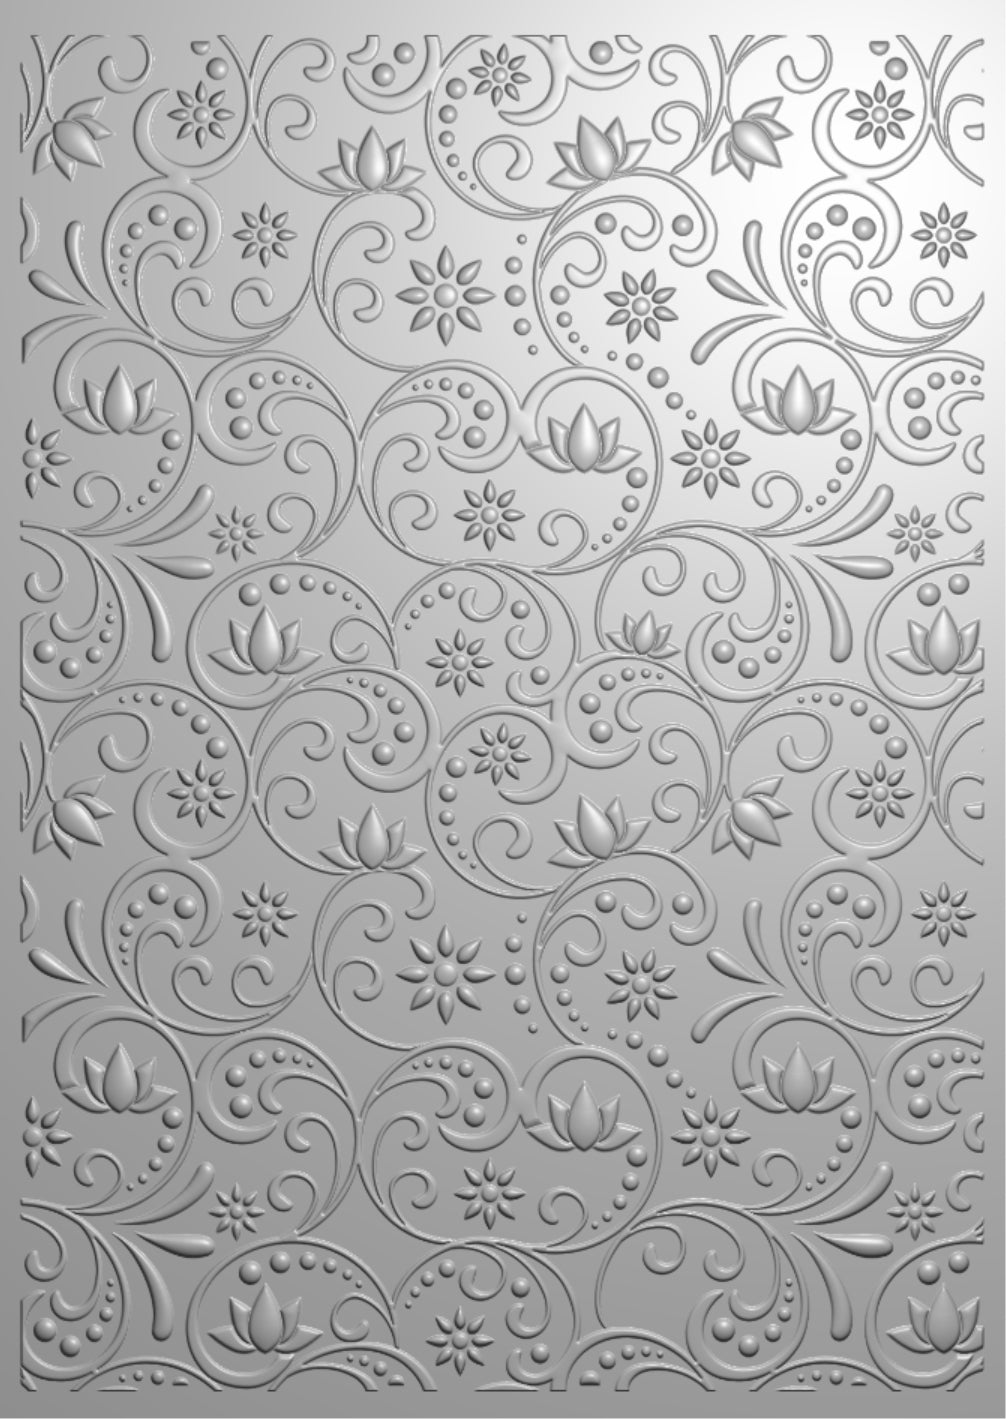 Creative Expressions Botanical Swirls 5 in x 7 in 3D Embossing Folder